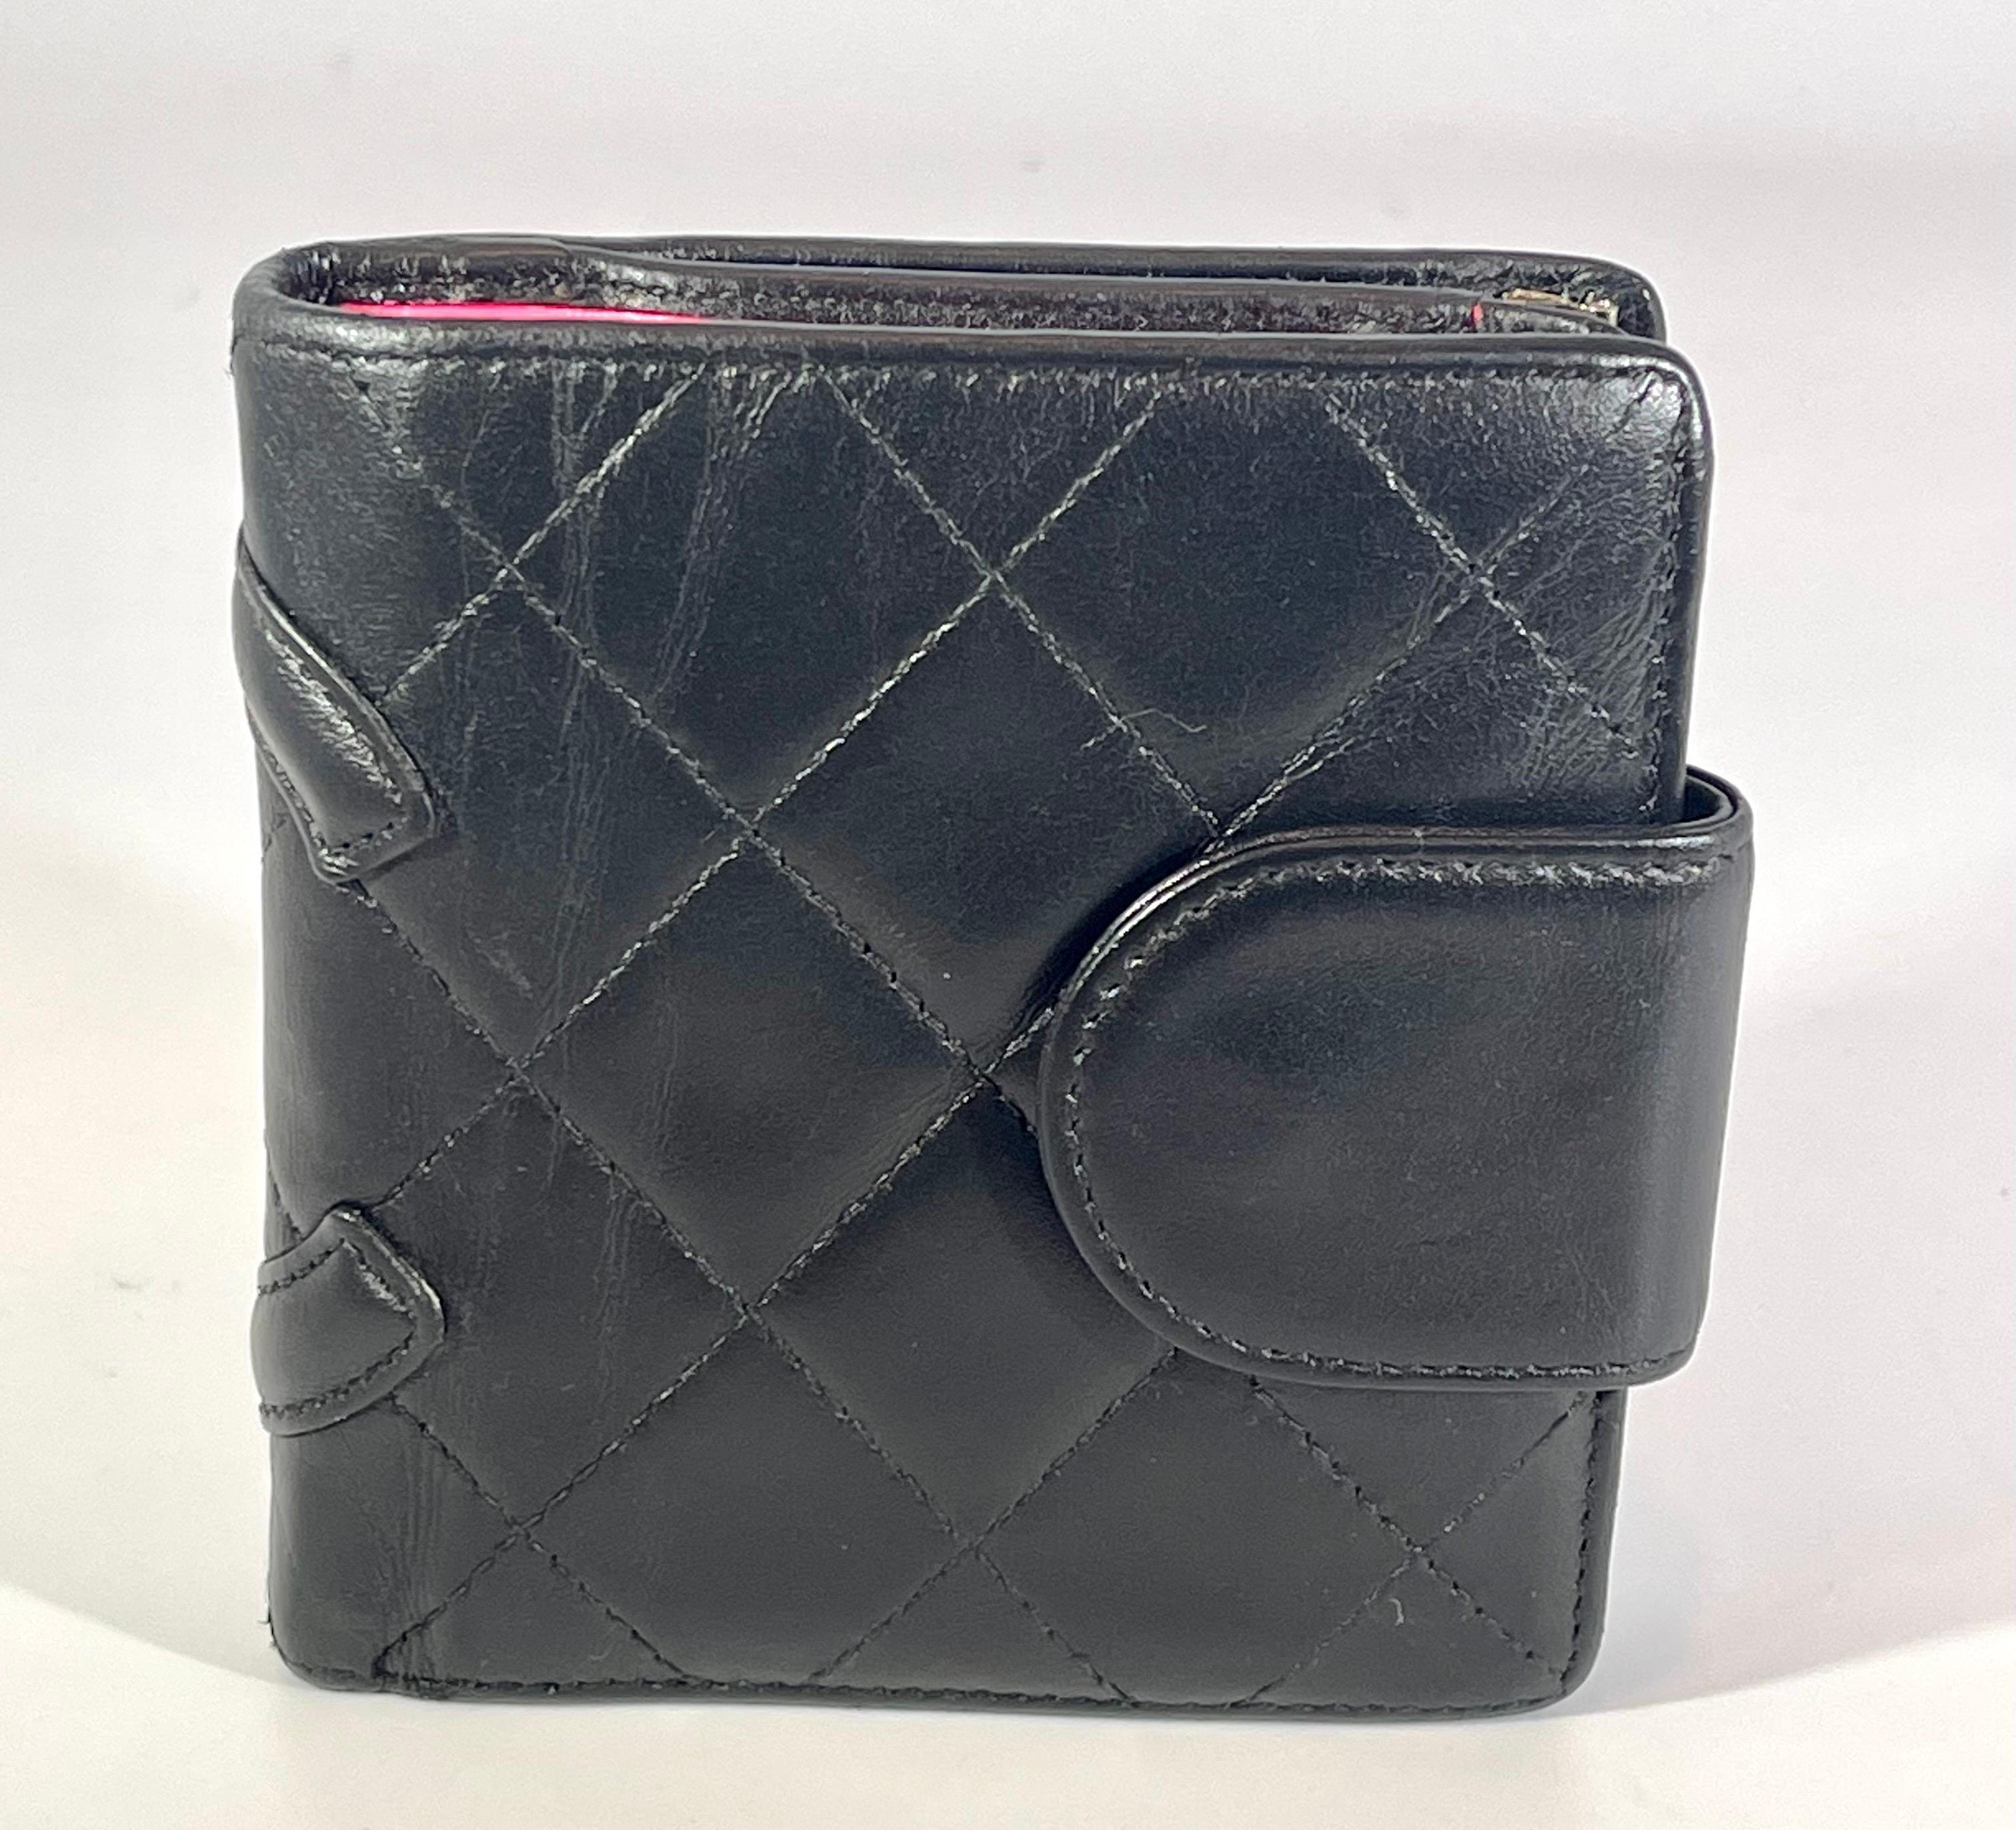  Chanel Black Cambon Quilted Leather Compact Wallet Hot pink Inside  For Sale 2